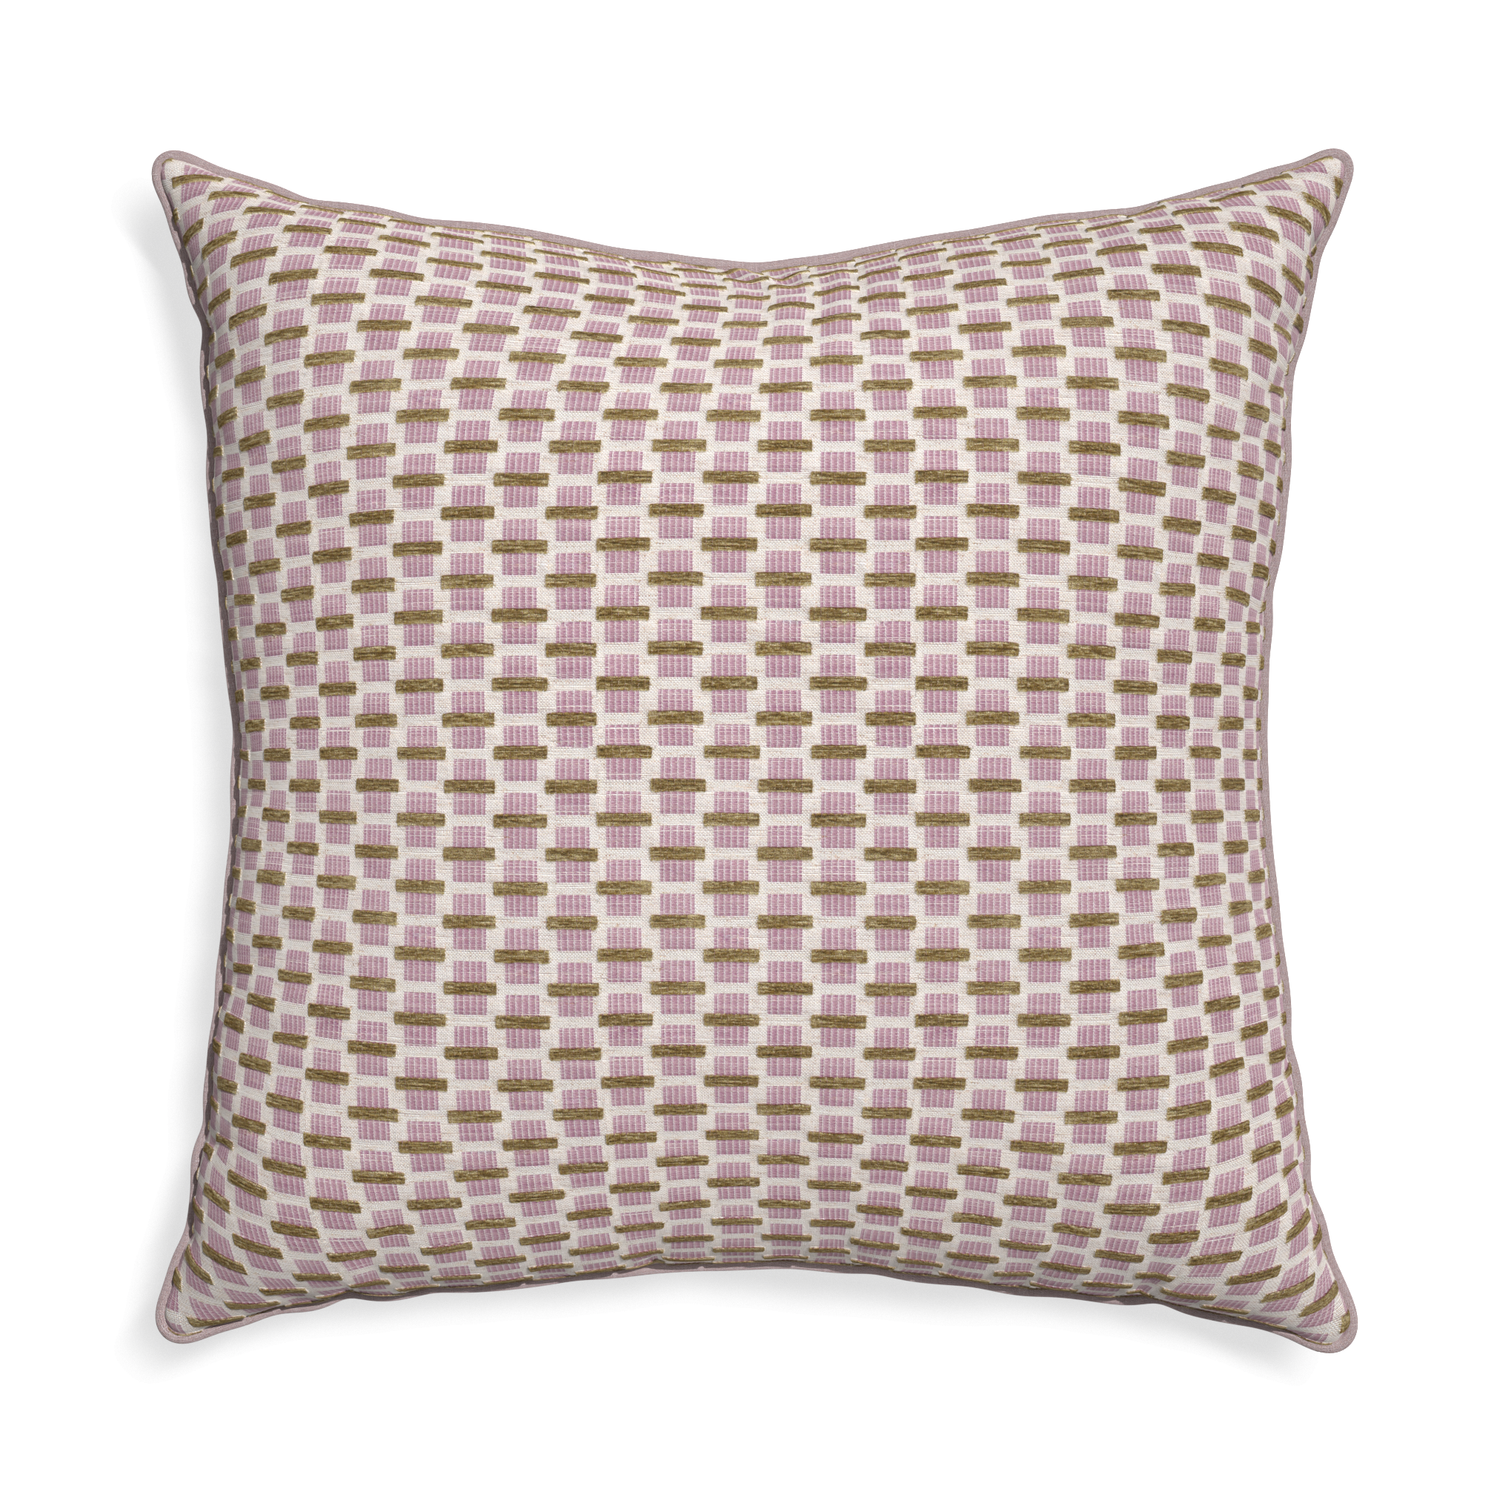 Euro-sham willow orchid custom pink geometric chenillepillow with orchid piping on white background